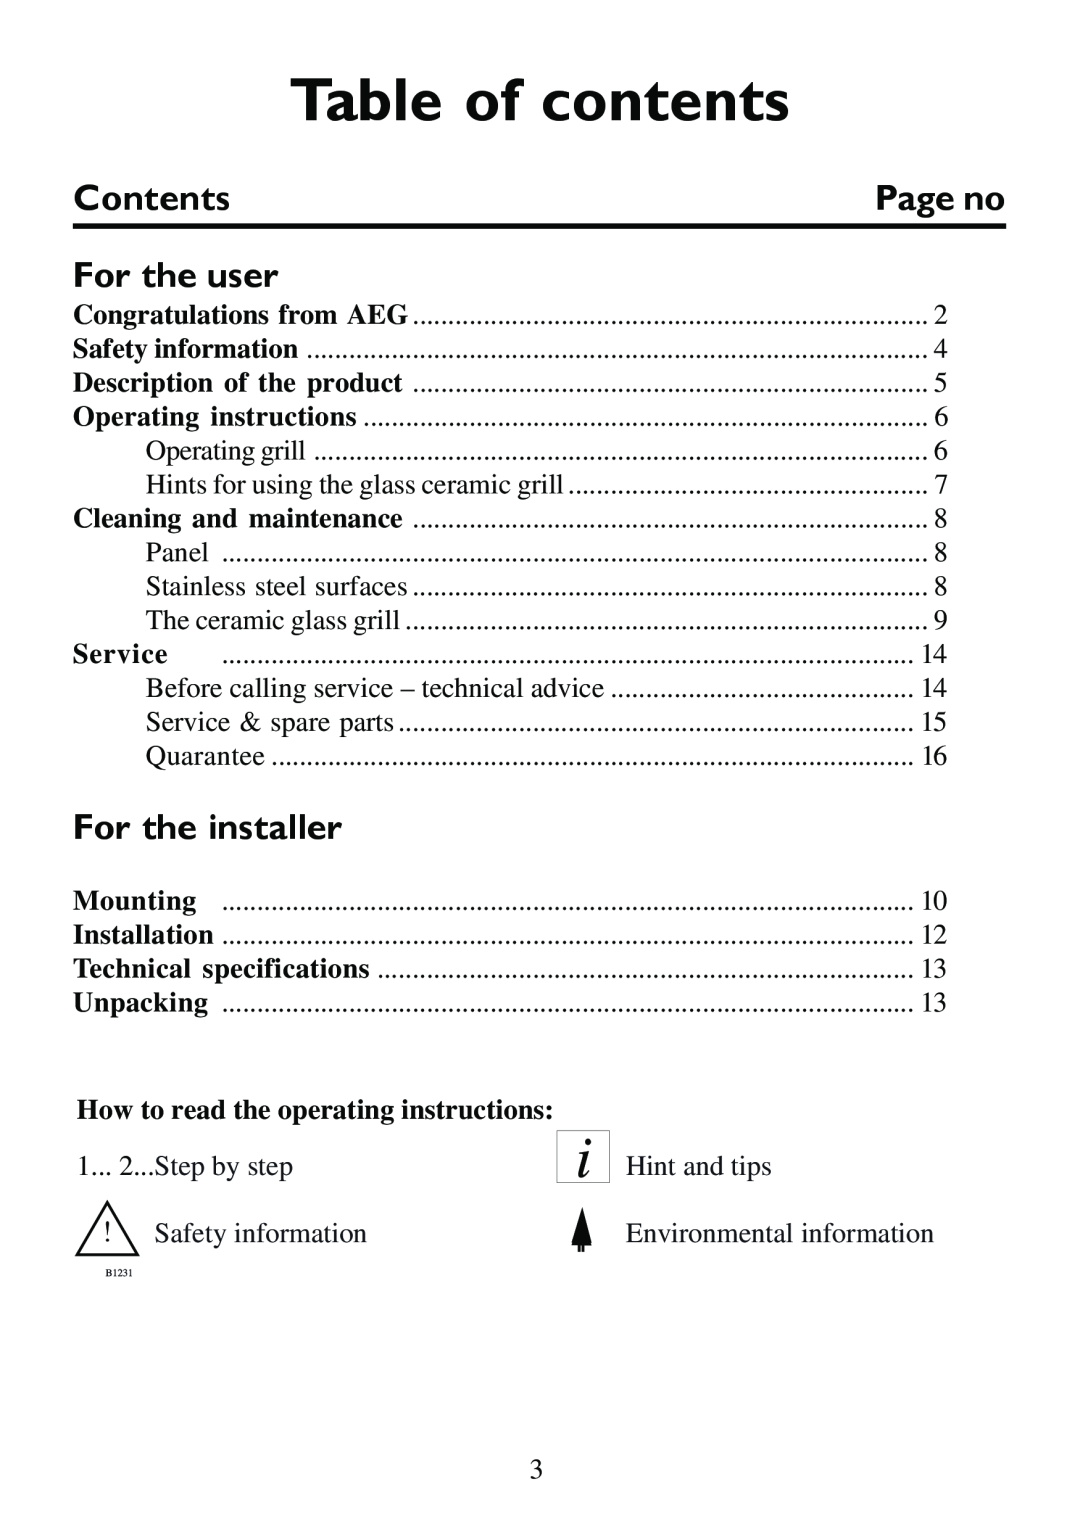 AEG 231GR-M Table of contents, Contents, For the user, For the installer, How to read the operating instructions, Page no 